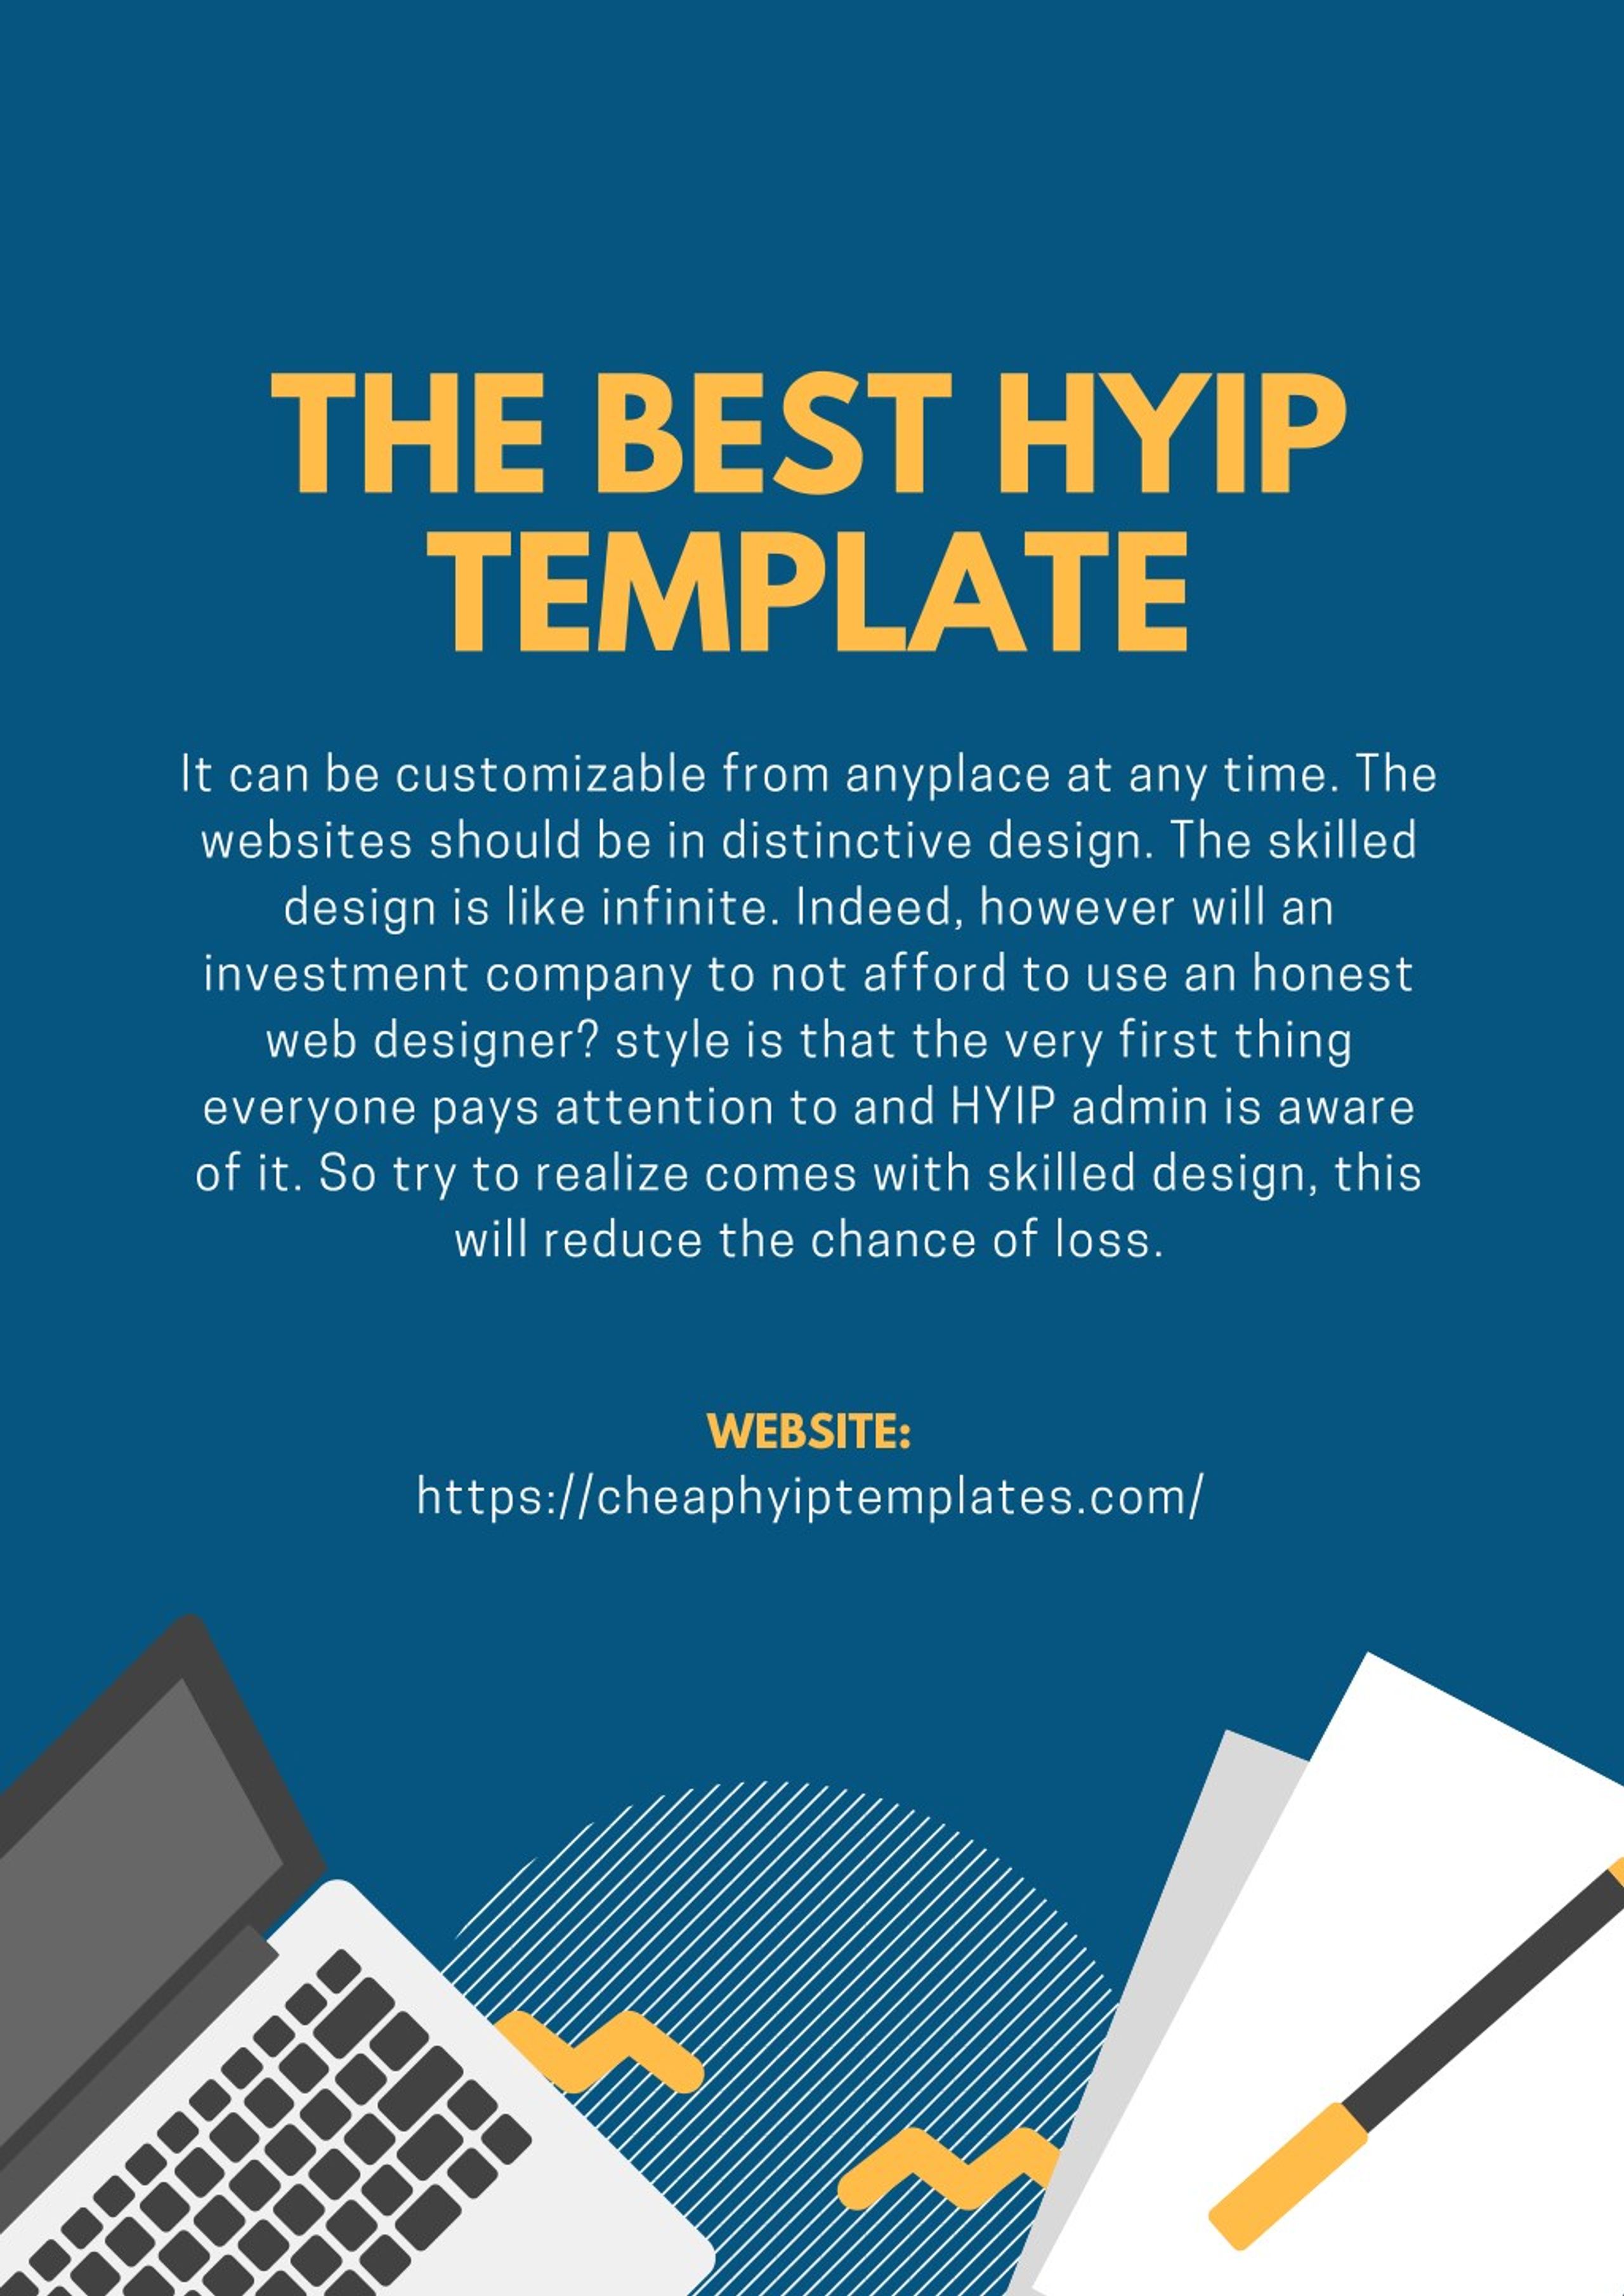 PPT - Best hyip template | Buy hyip template | Goldcoders ...